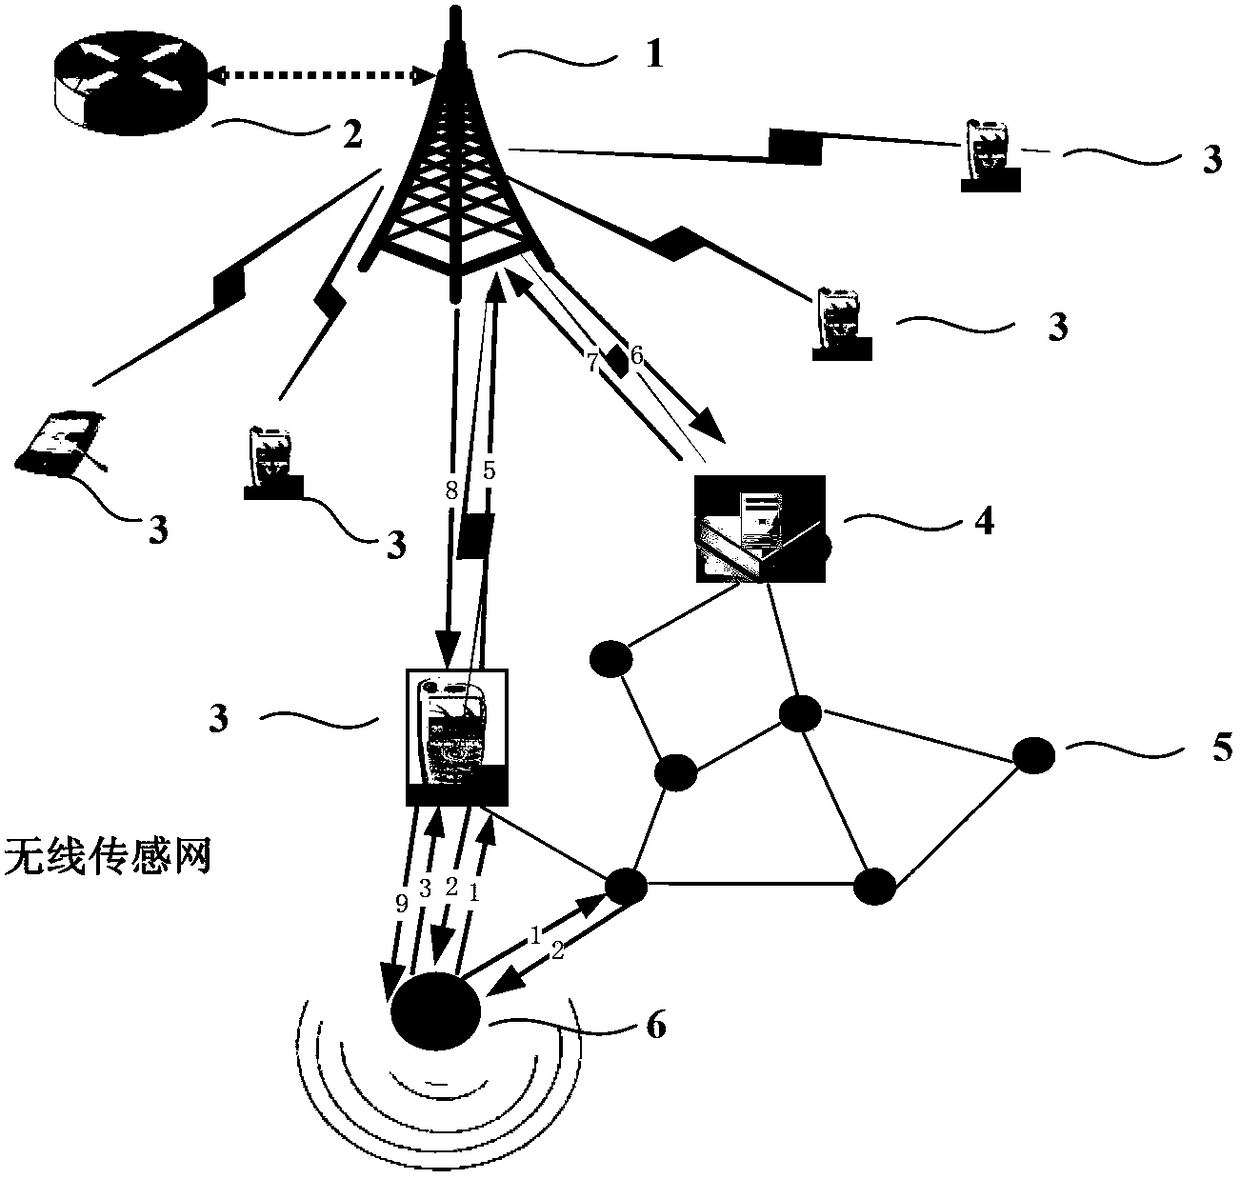 An Address Assignment Method Based on Heterogeneous Mesh Network Convergence